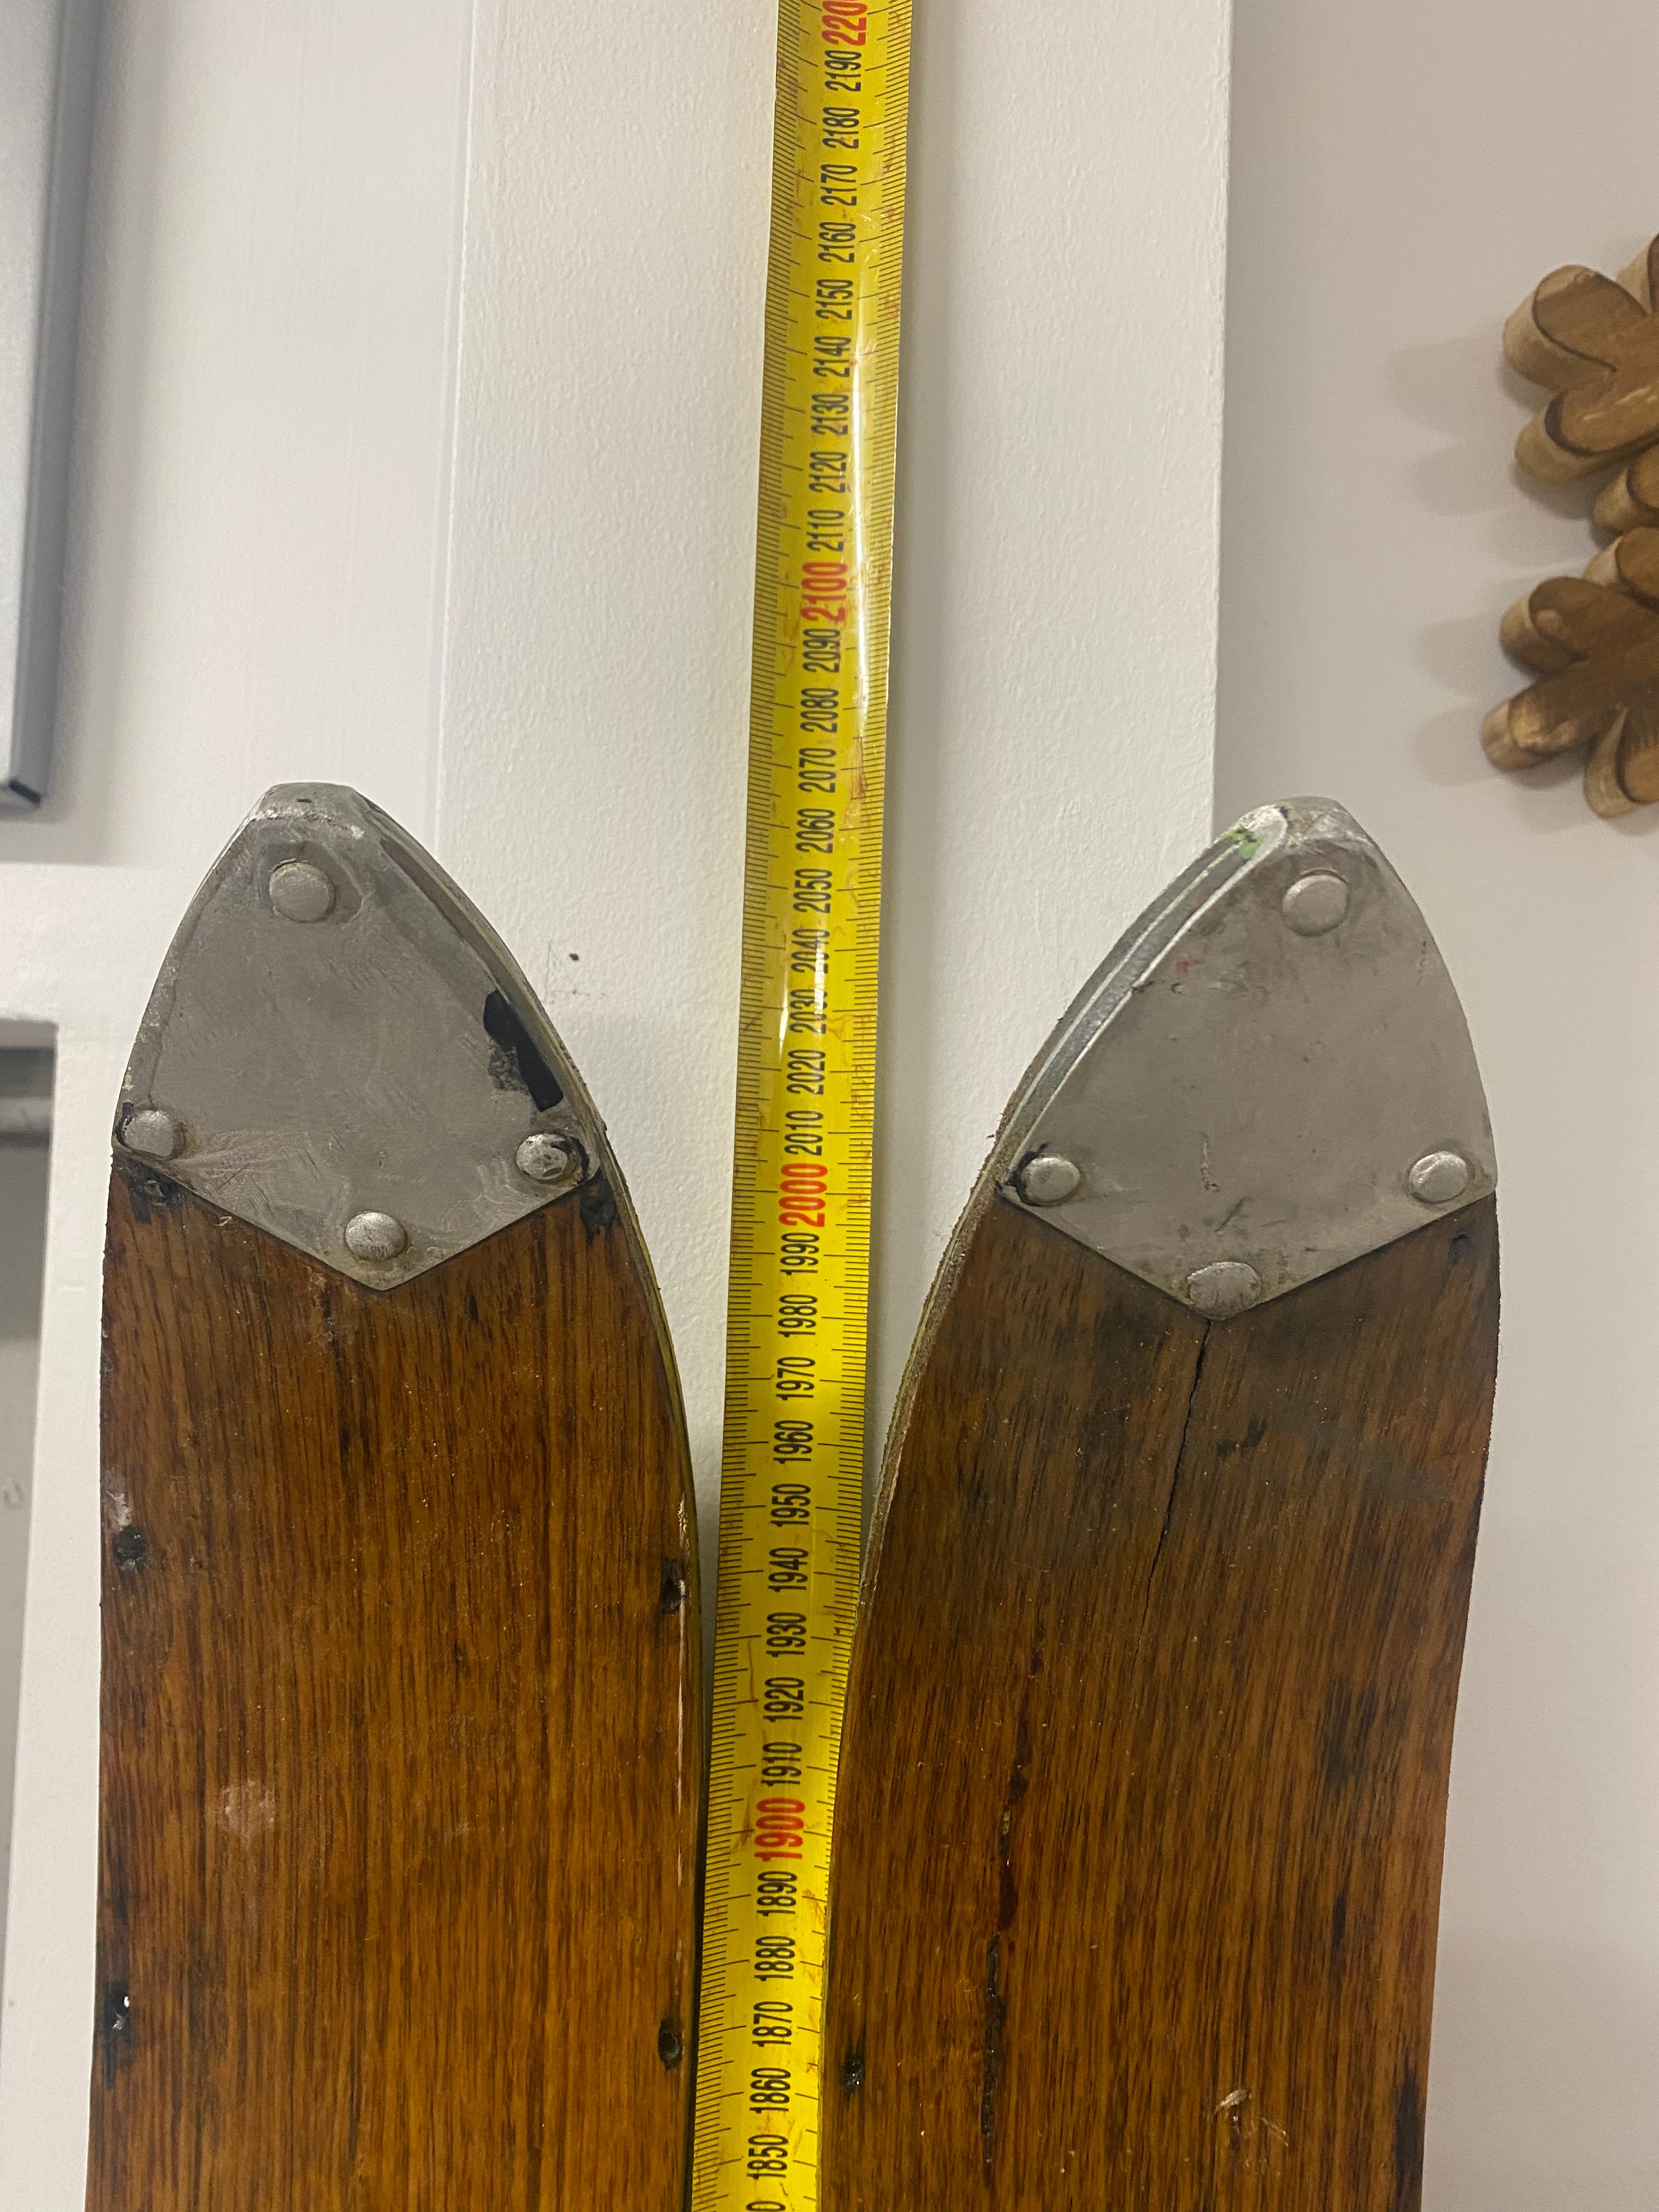 Ski Tips Front View: Vintage Wooden Skis with metal bindings. Lent against a white wall, with a tape measure on the wall.